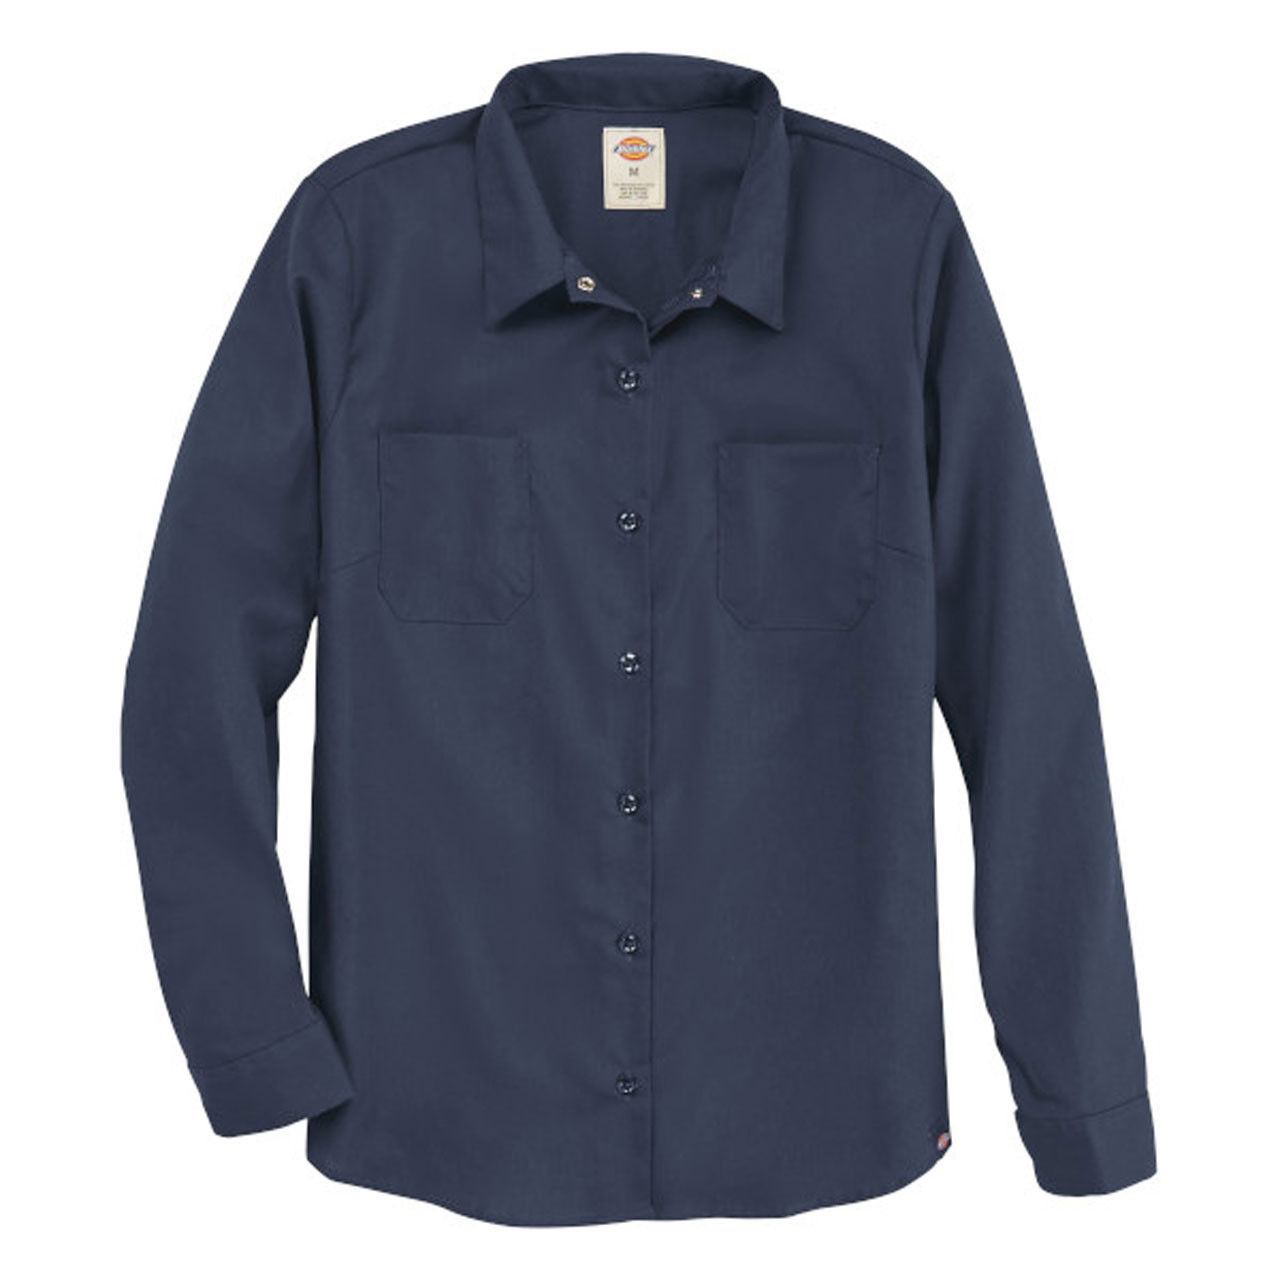 Does the dickie long sleeve shirts feature the Dickies logo?